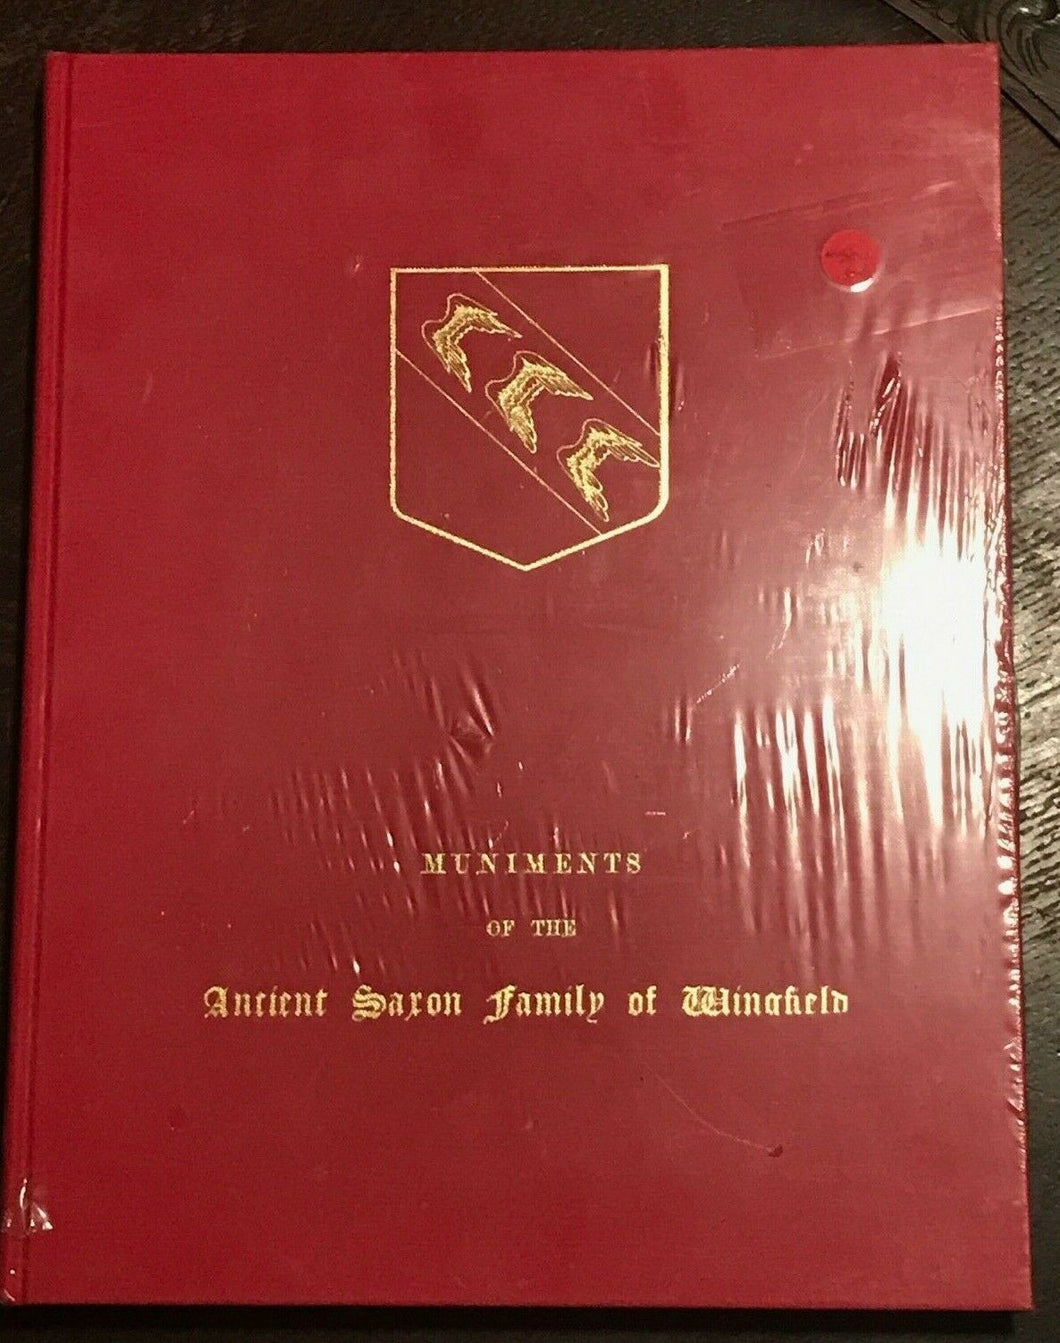 MUNIMENTS OF THE ANCIENT SAXON FAMILY OF WINGFIELD - Edward - 1st, 1987 - SEALED